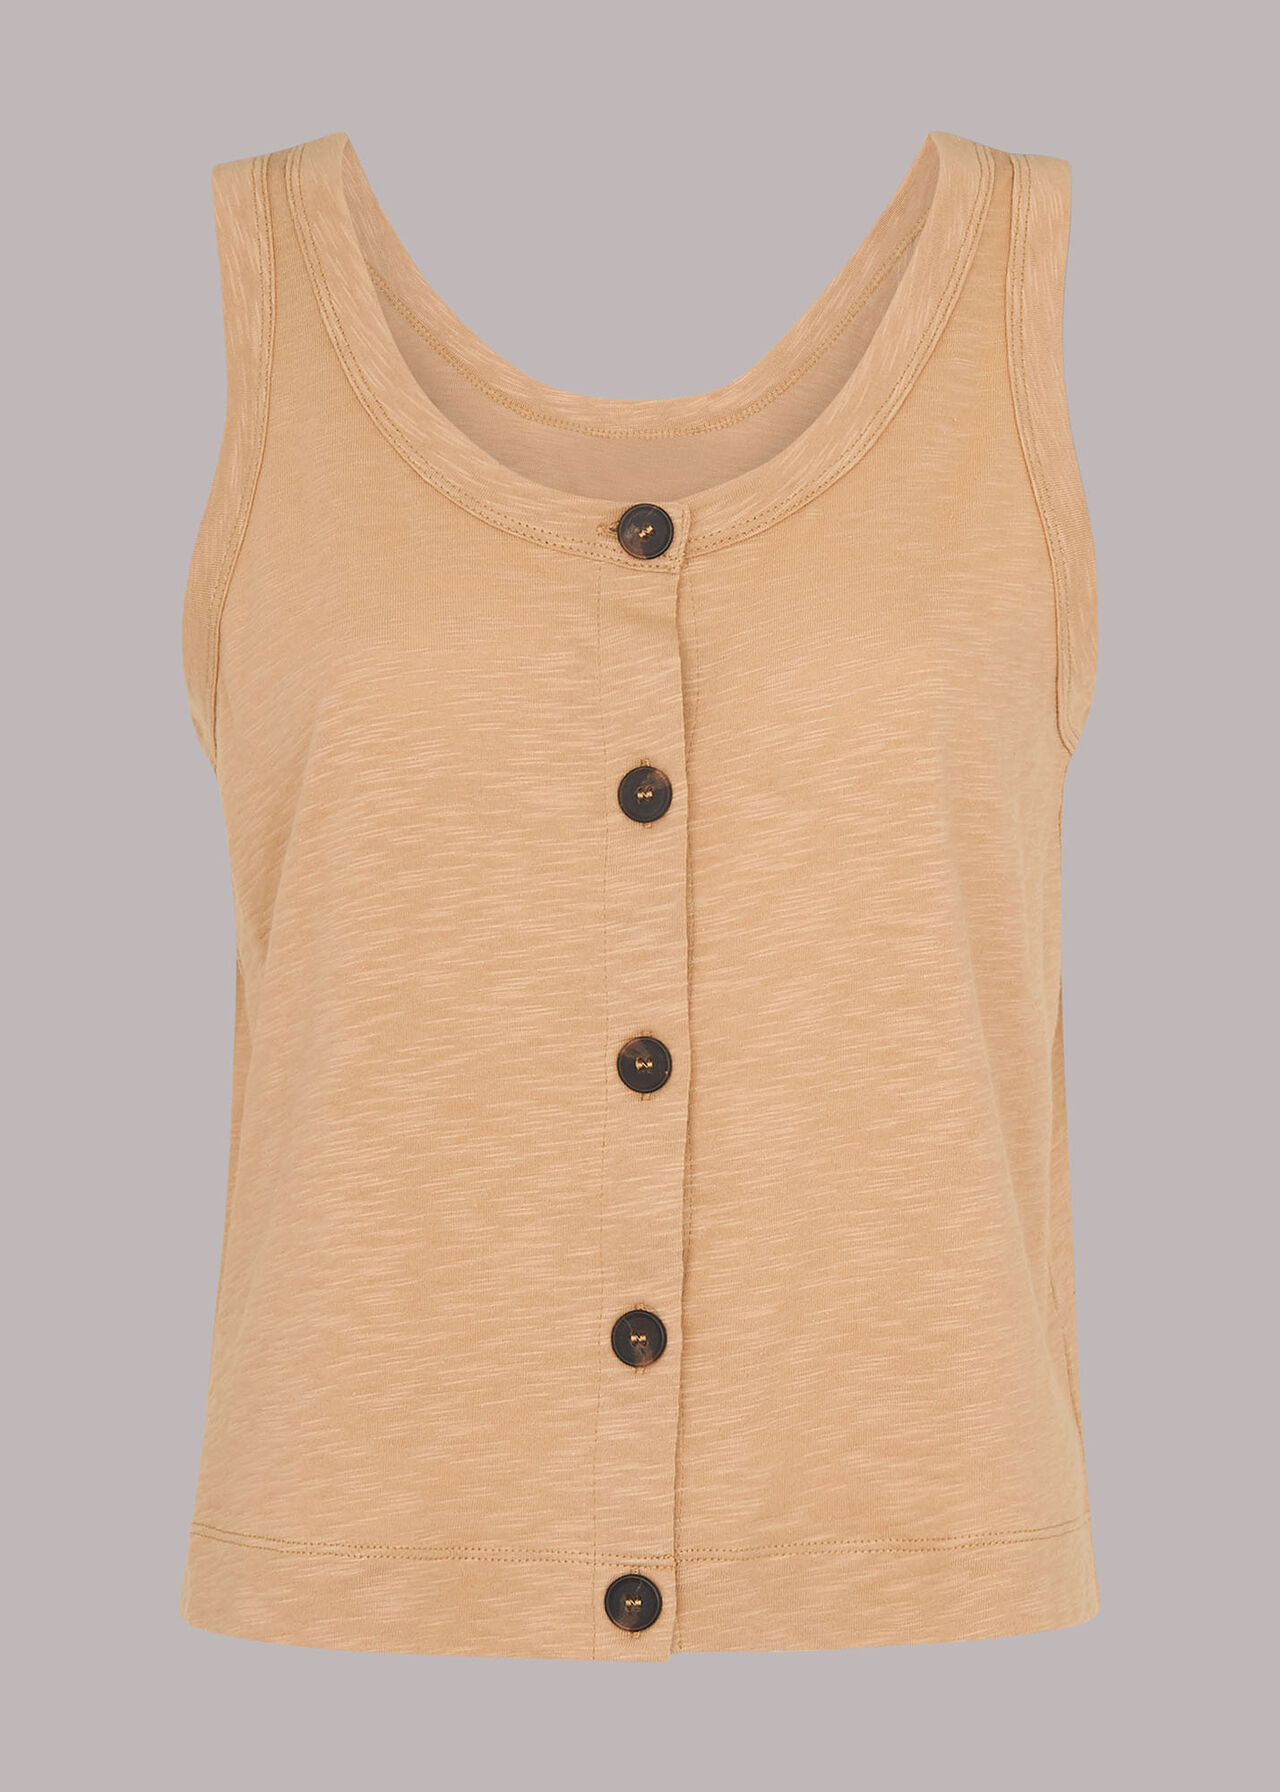 Reversible Button Up Tank Top